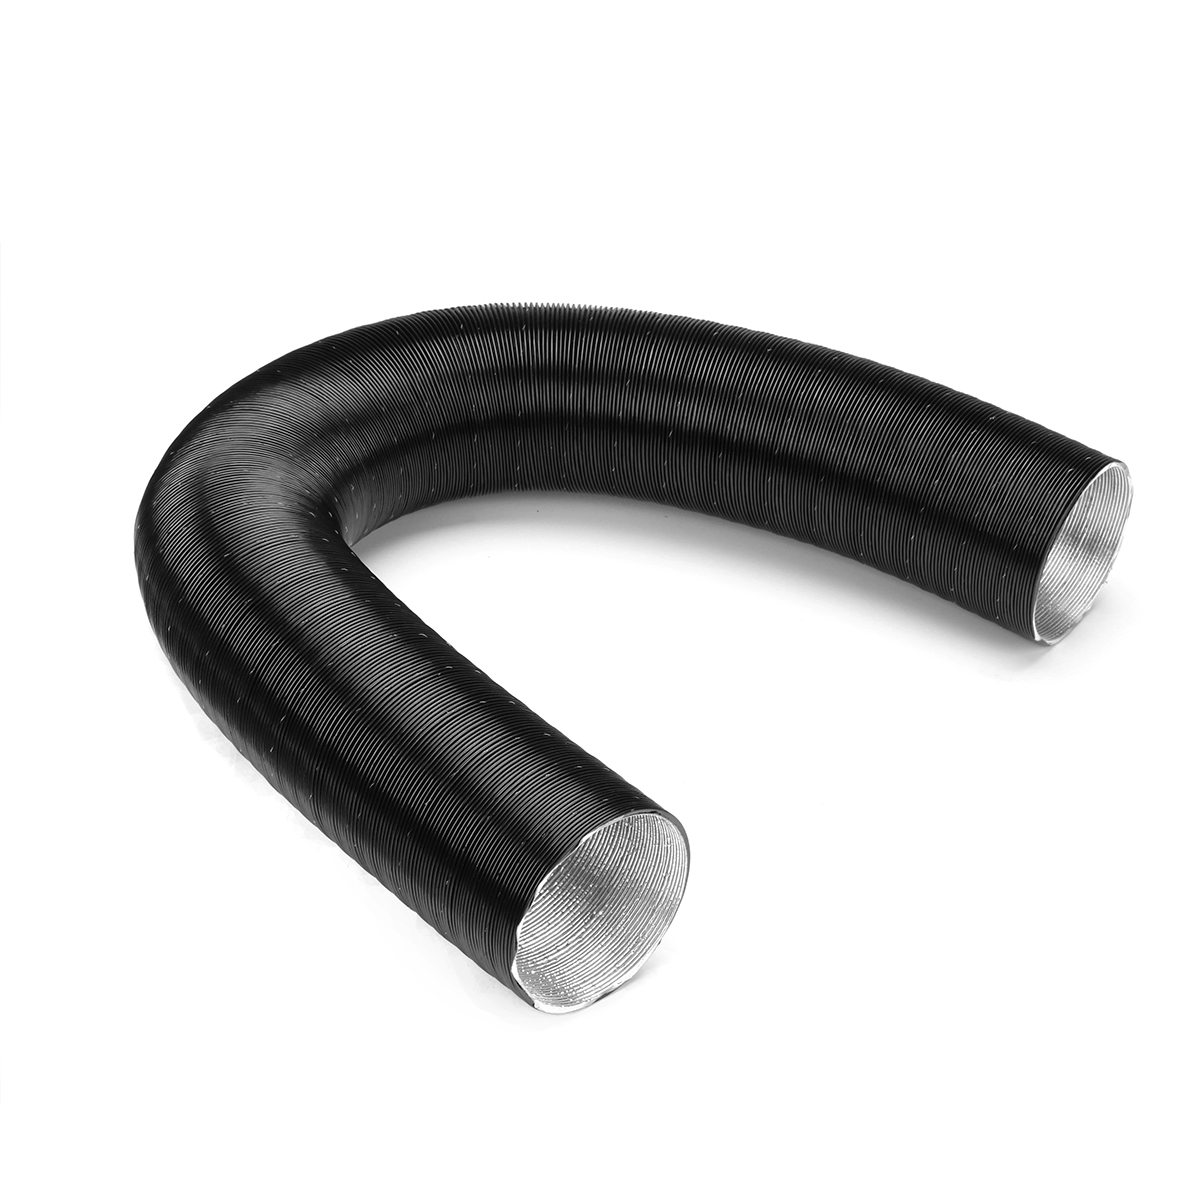 60mm-Heater-Duct-Pipe-Hot--Cold-Air-Conditioner-Ducting-For-Diesel-Heater-Webasto-Dometic-1348515-7